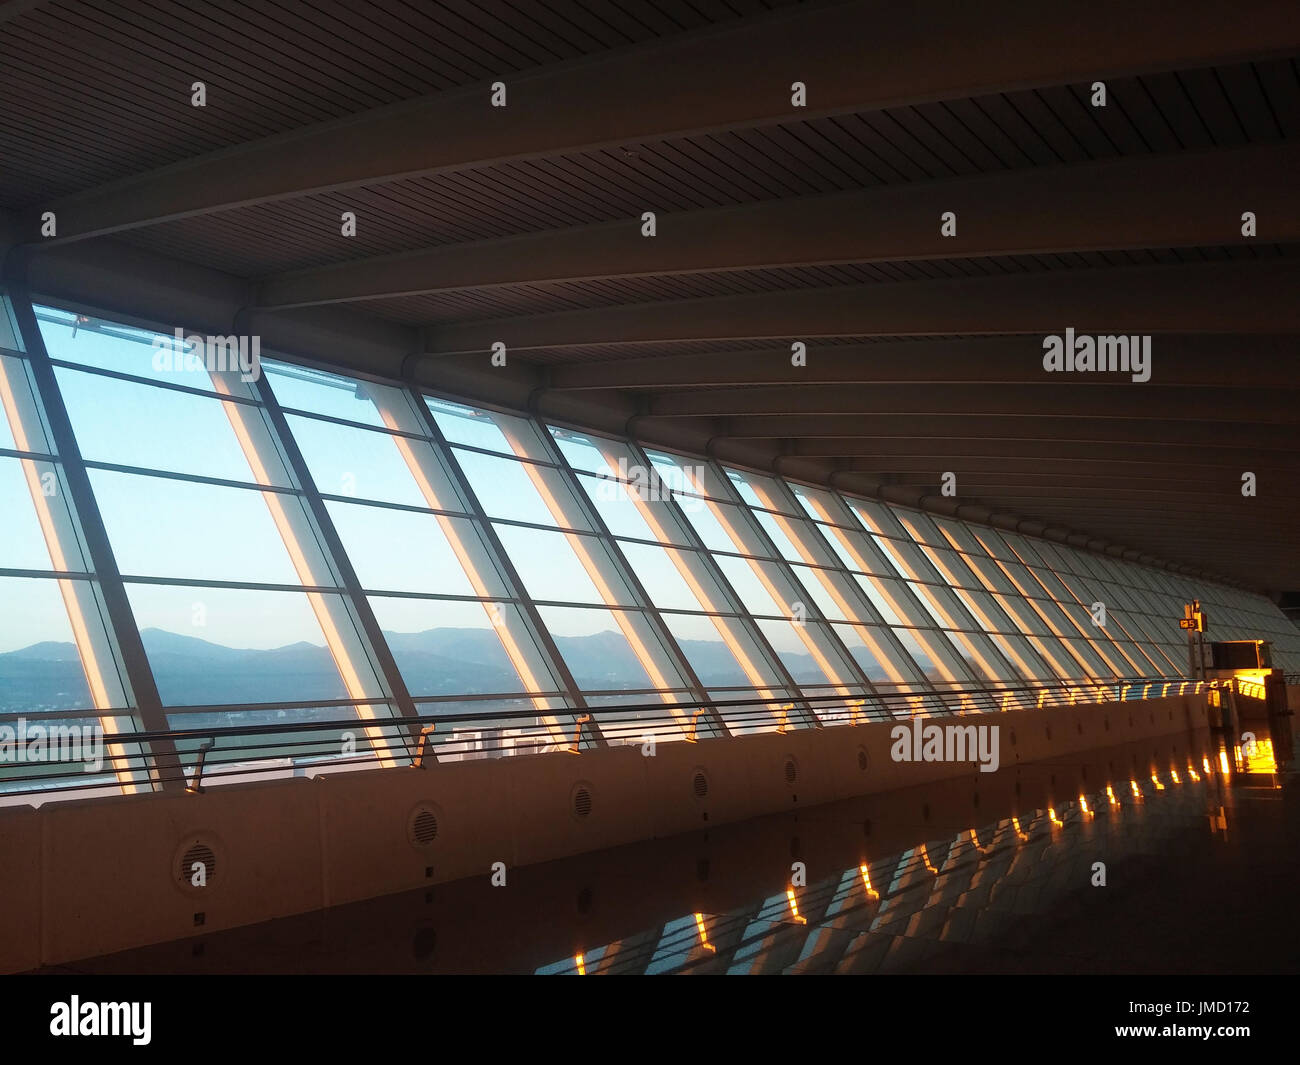 Dawning in Bilbao Airport (new terminal by Santiago Calatrava), Loiu, Biscay, Basque Country, Spain Stock Photo